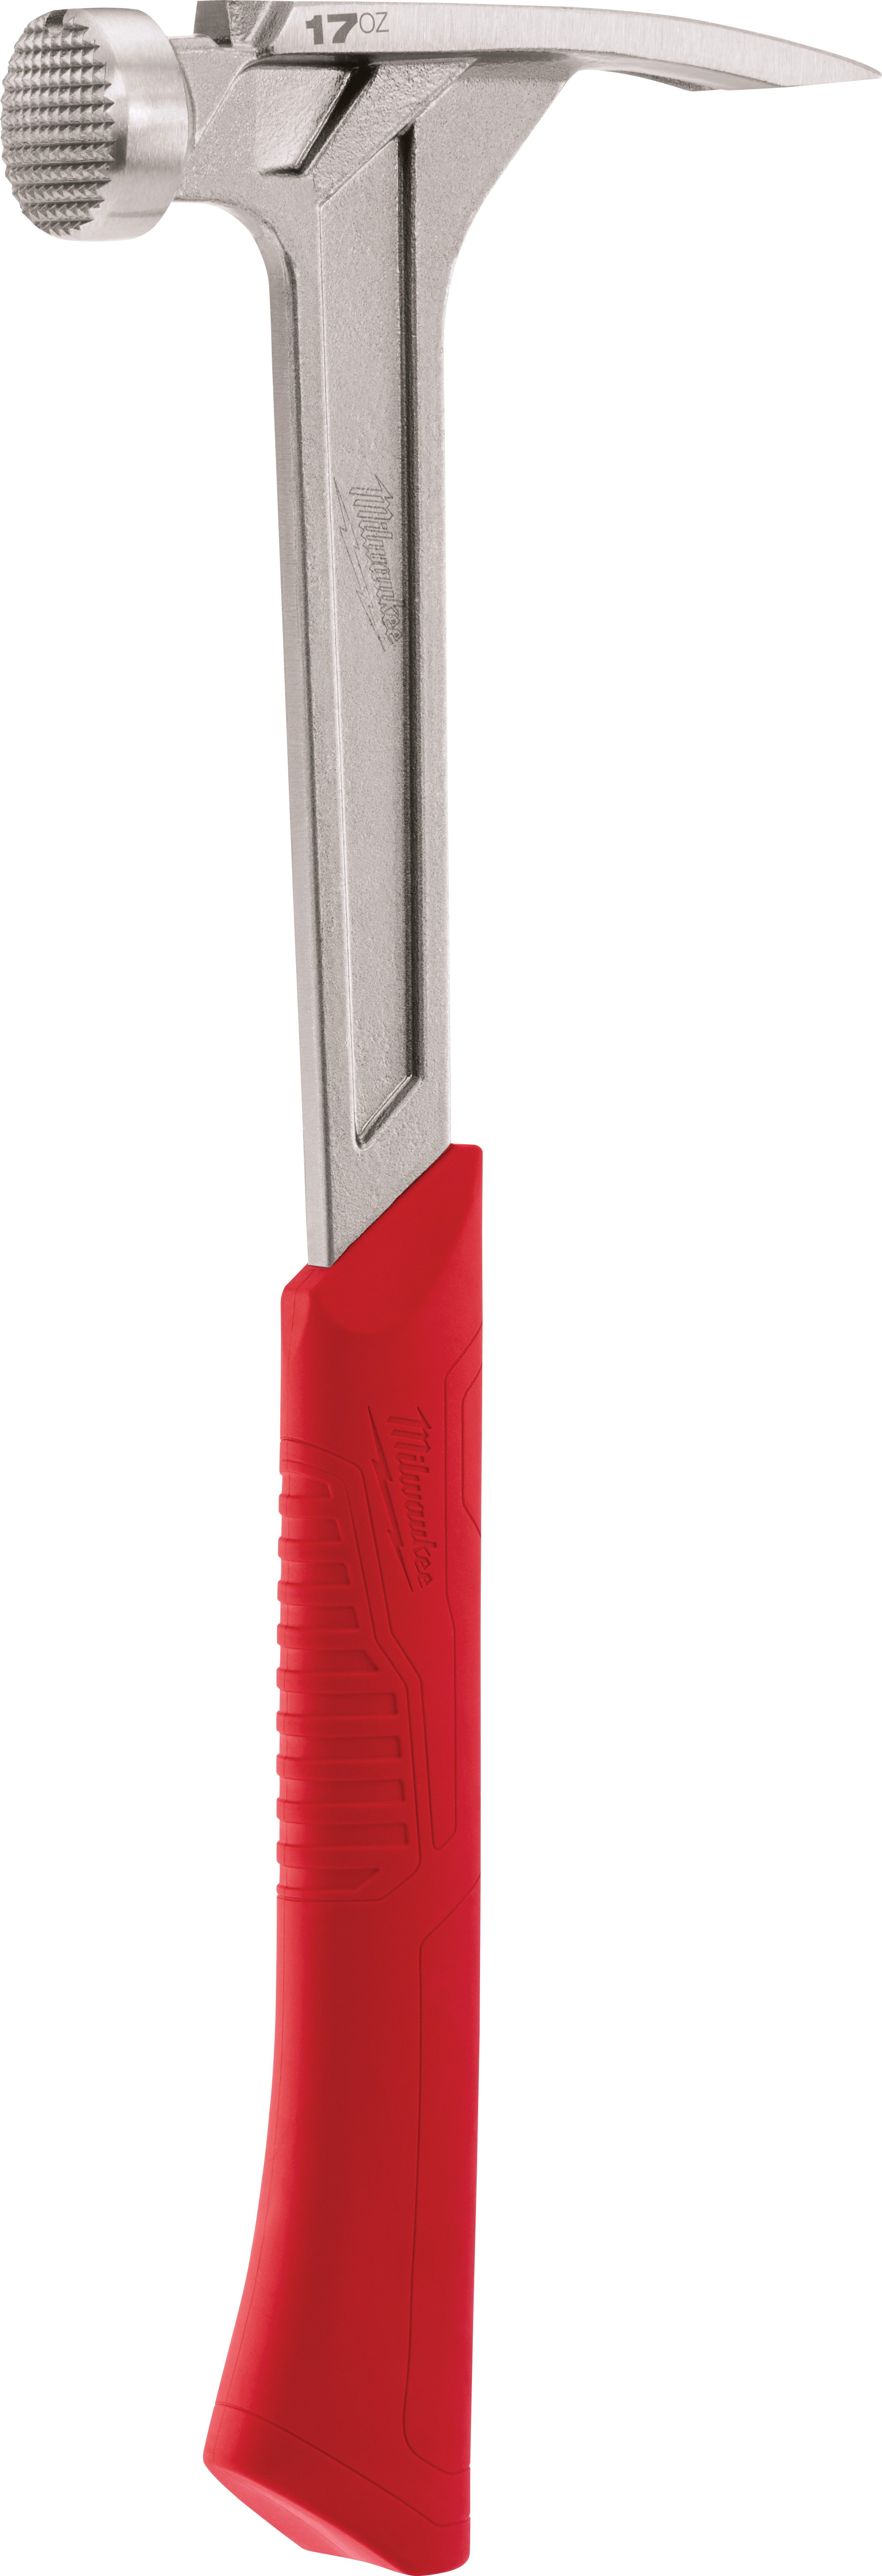 The Milwaukee® 17 oz milled face hammer is designed from the ground-up to address common user frustrations with hammers currently available on the mar...